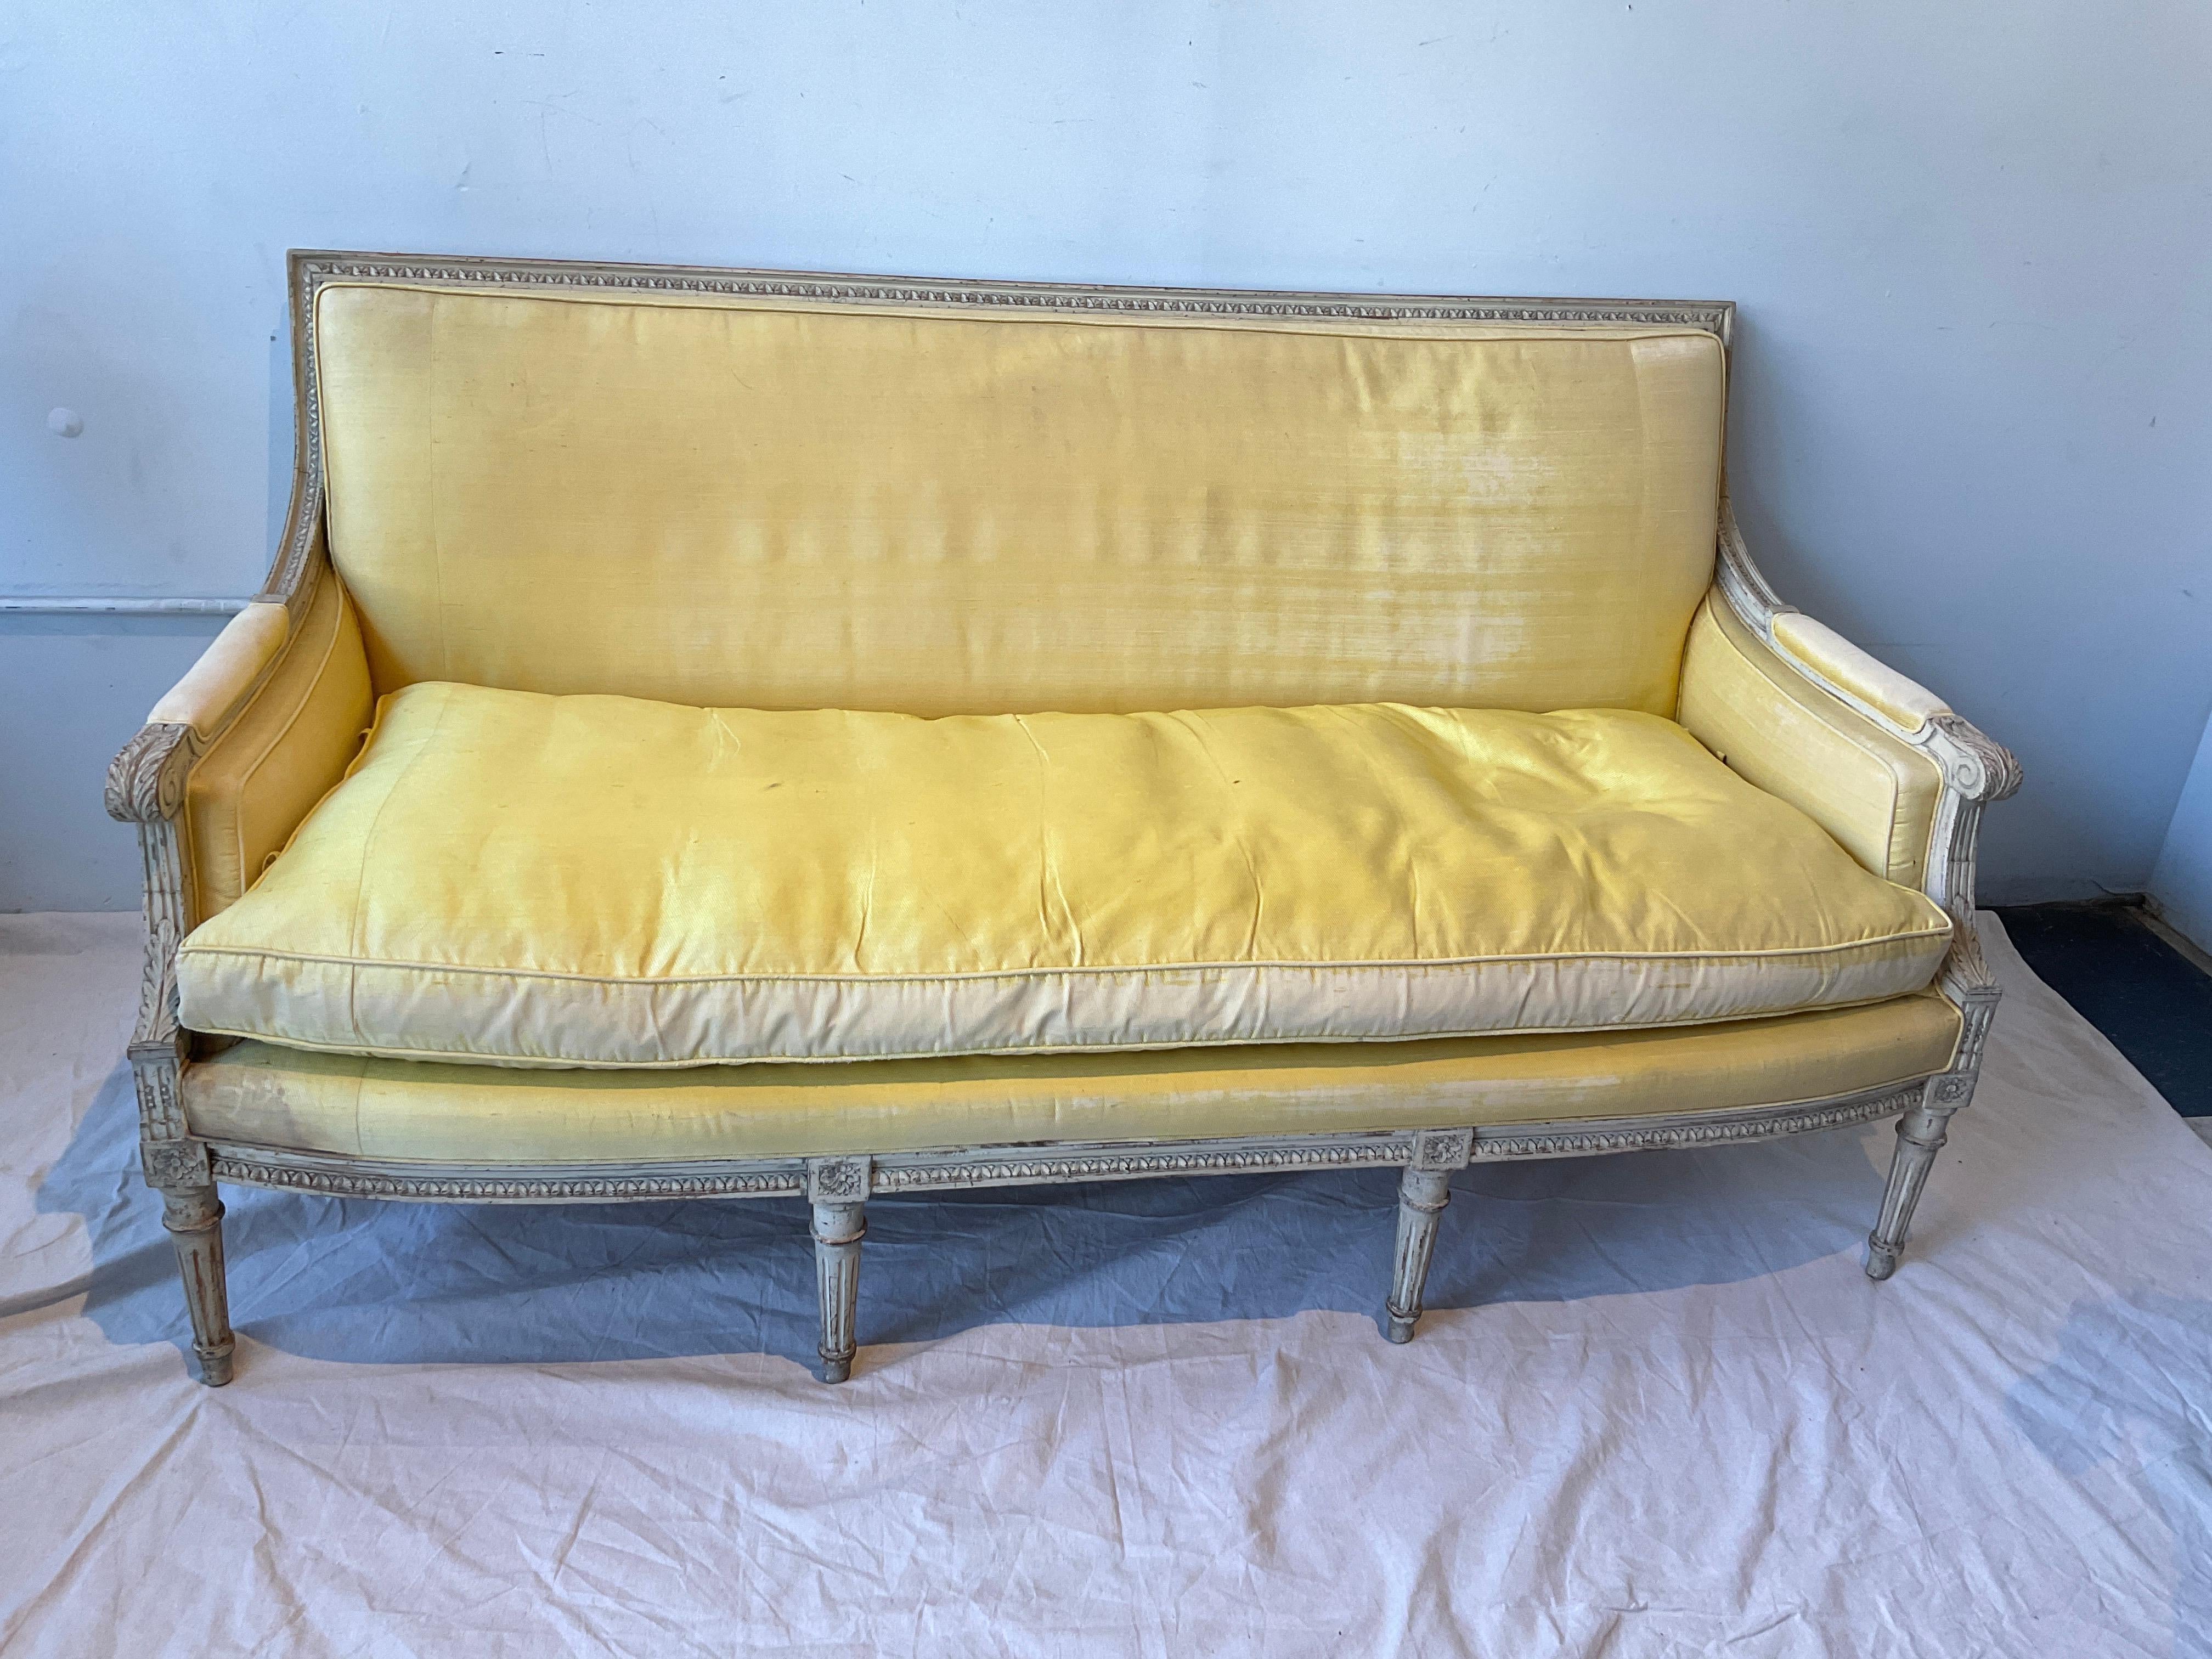 1880s French Louis XVI carved wood couch in a painted finish. From Yale R. Barge Antique shop of New York City.
Down cushion,  Needs reupholstering.